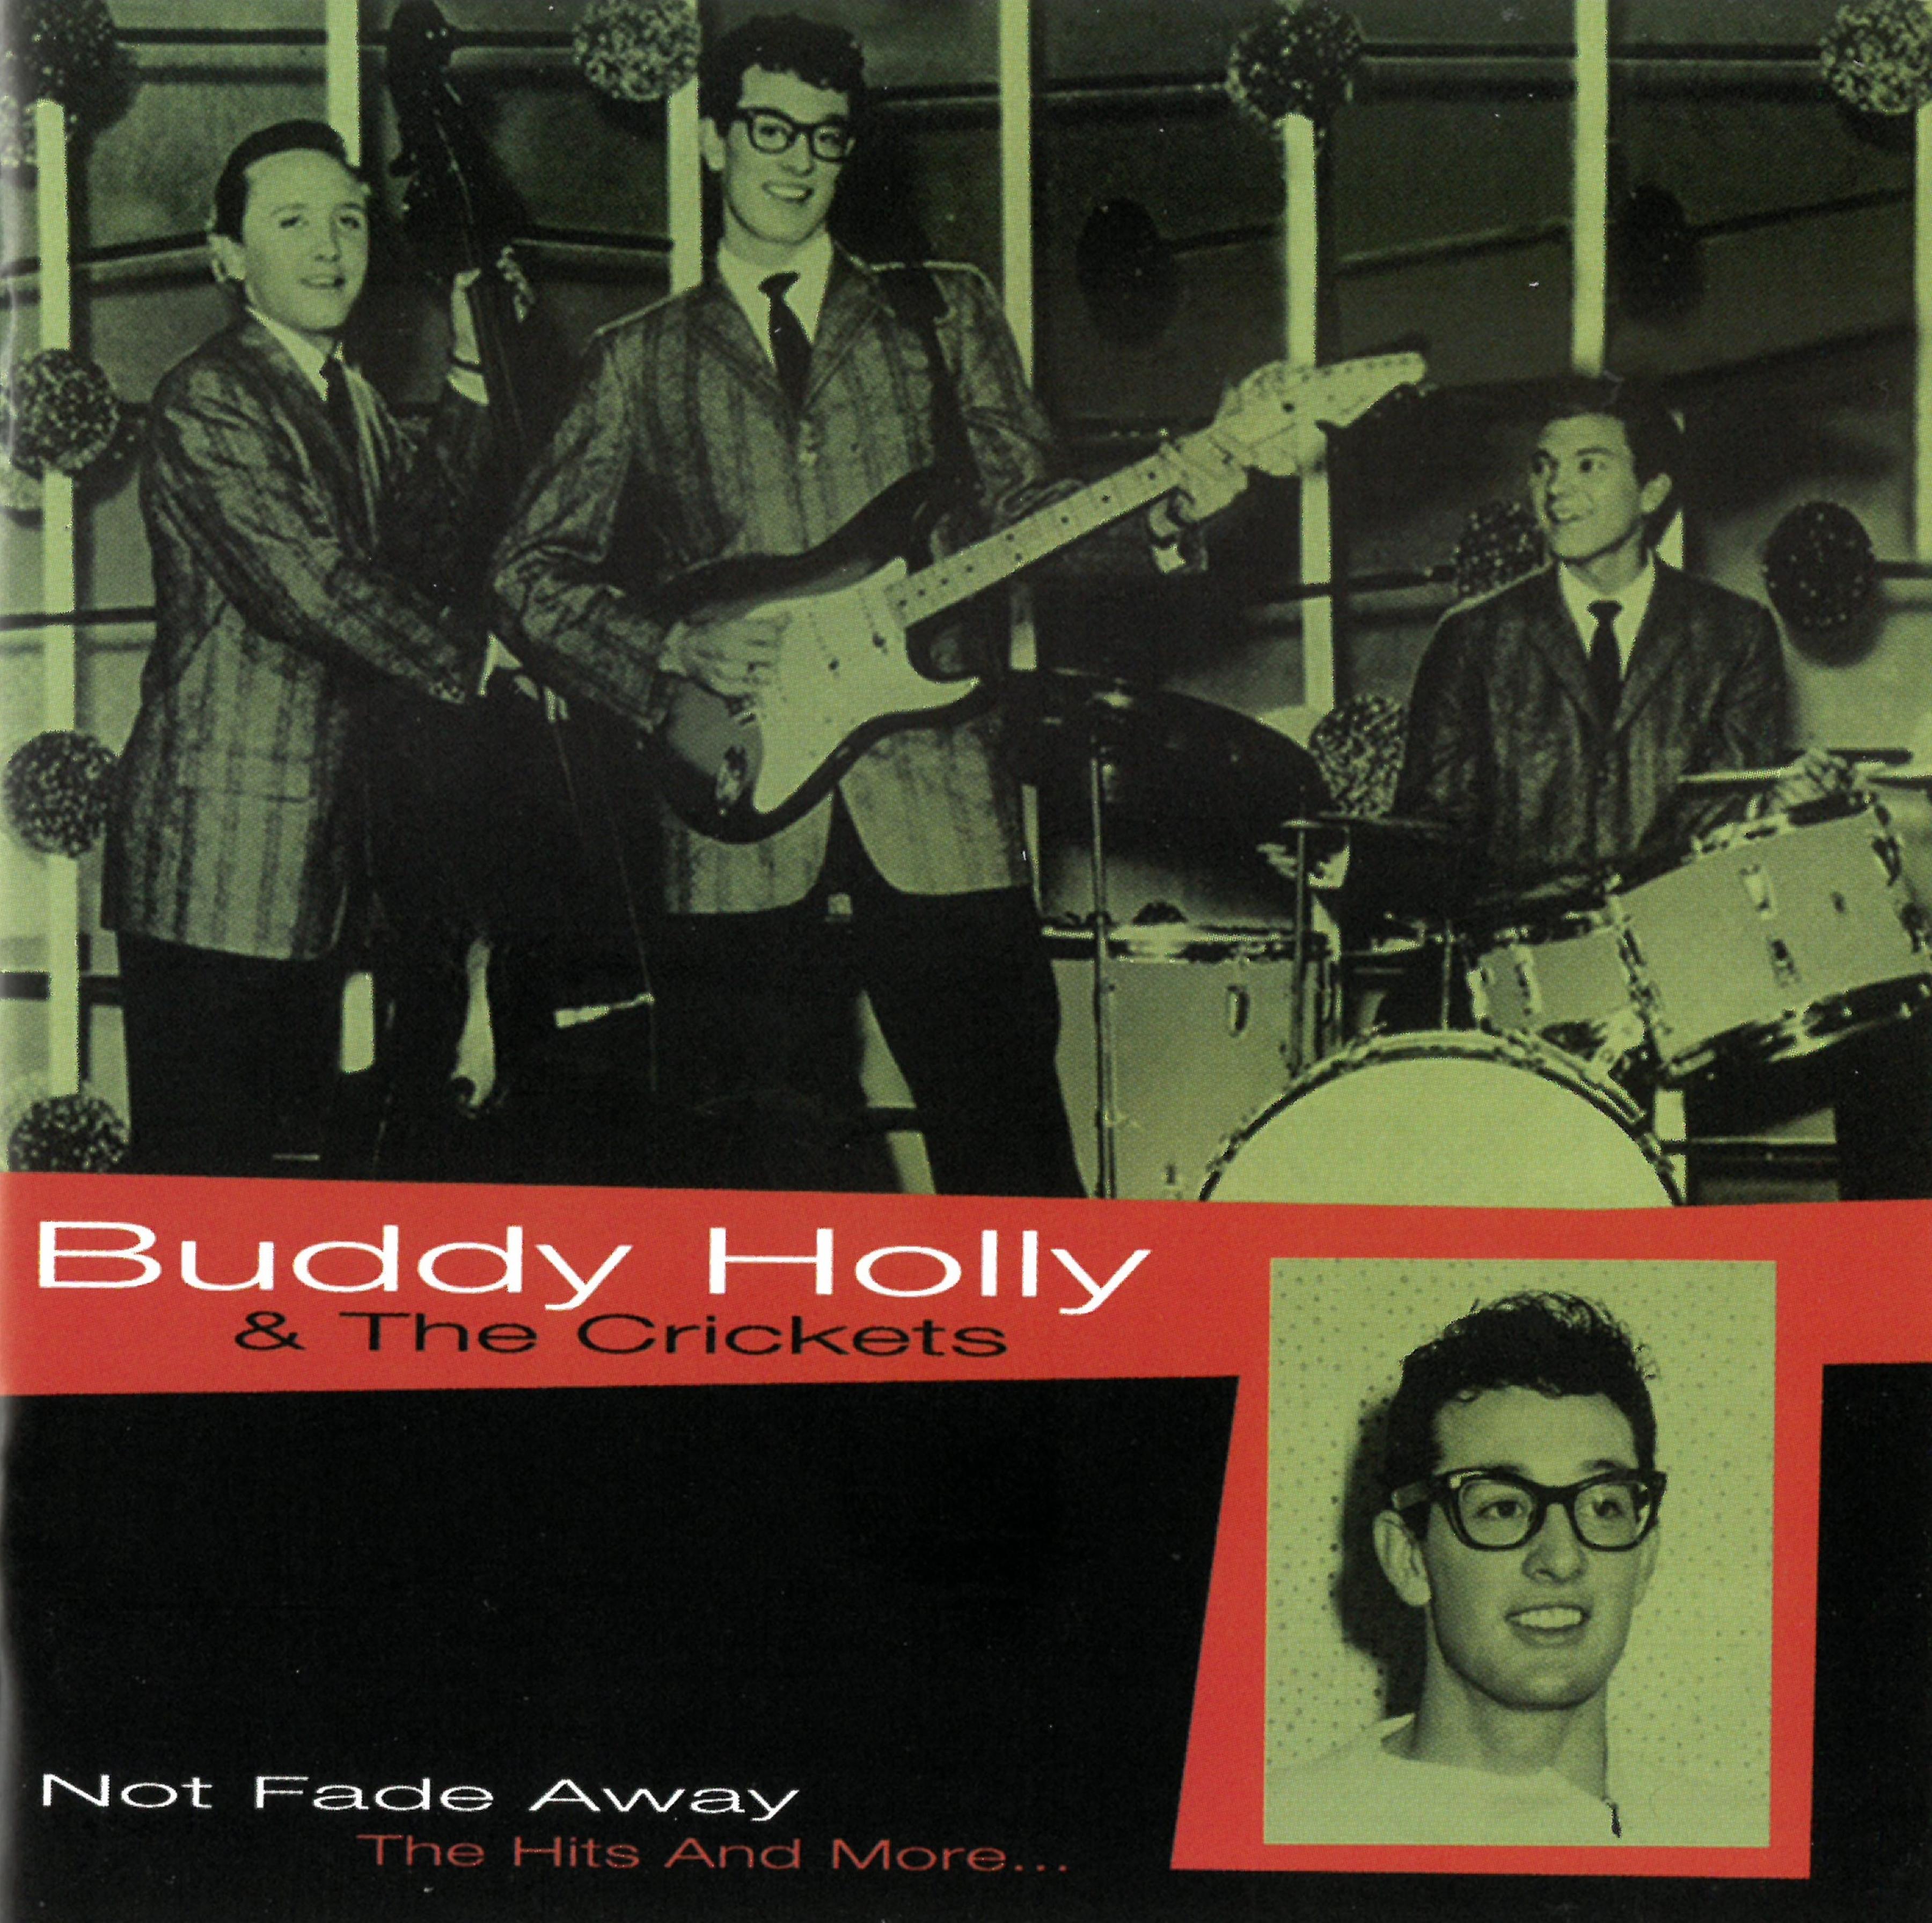 Buddy Holly - Blue Suede Shoes (demo)